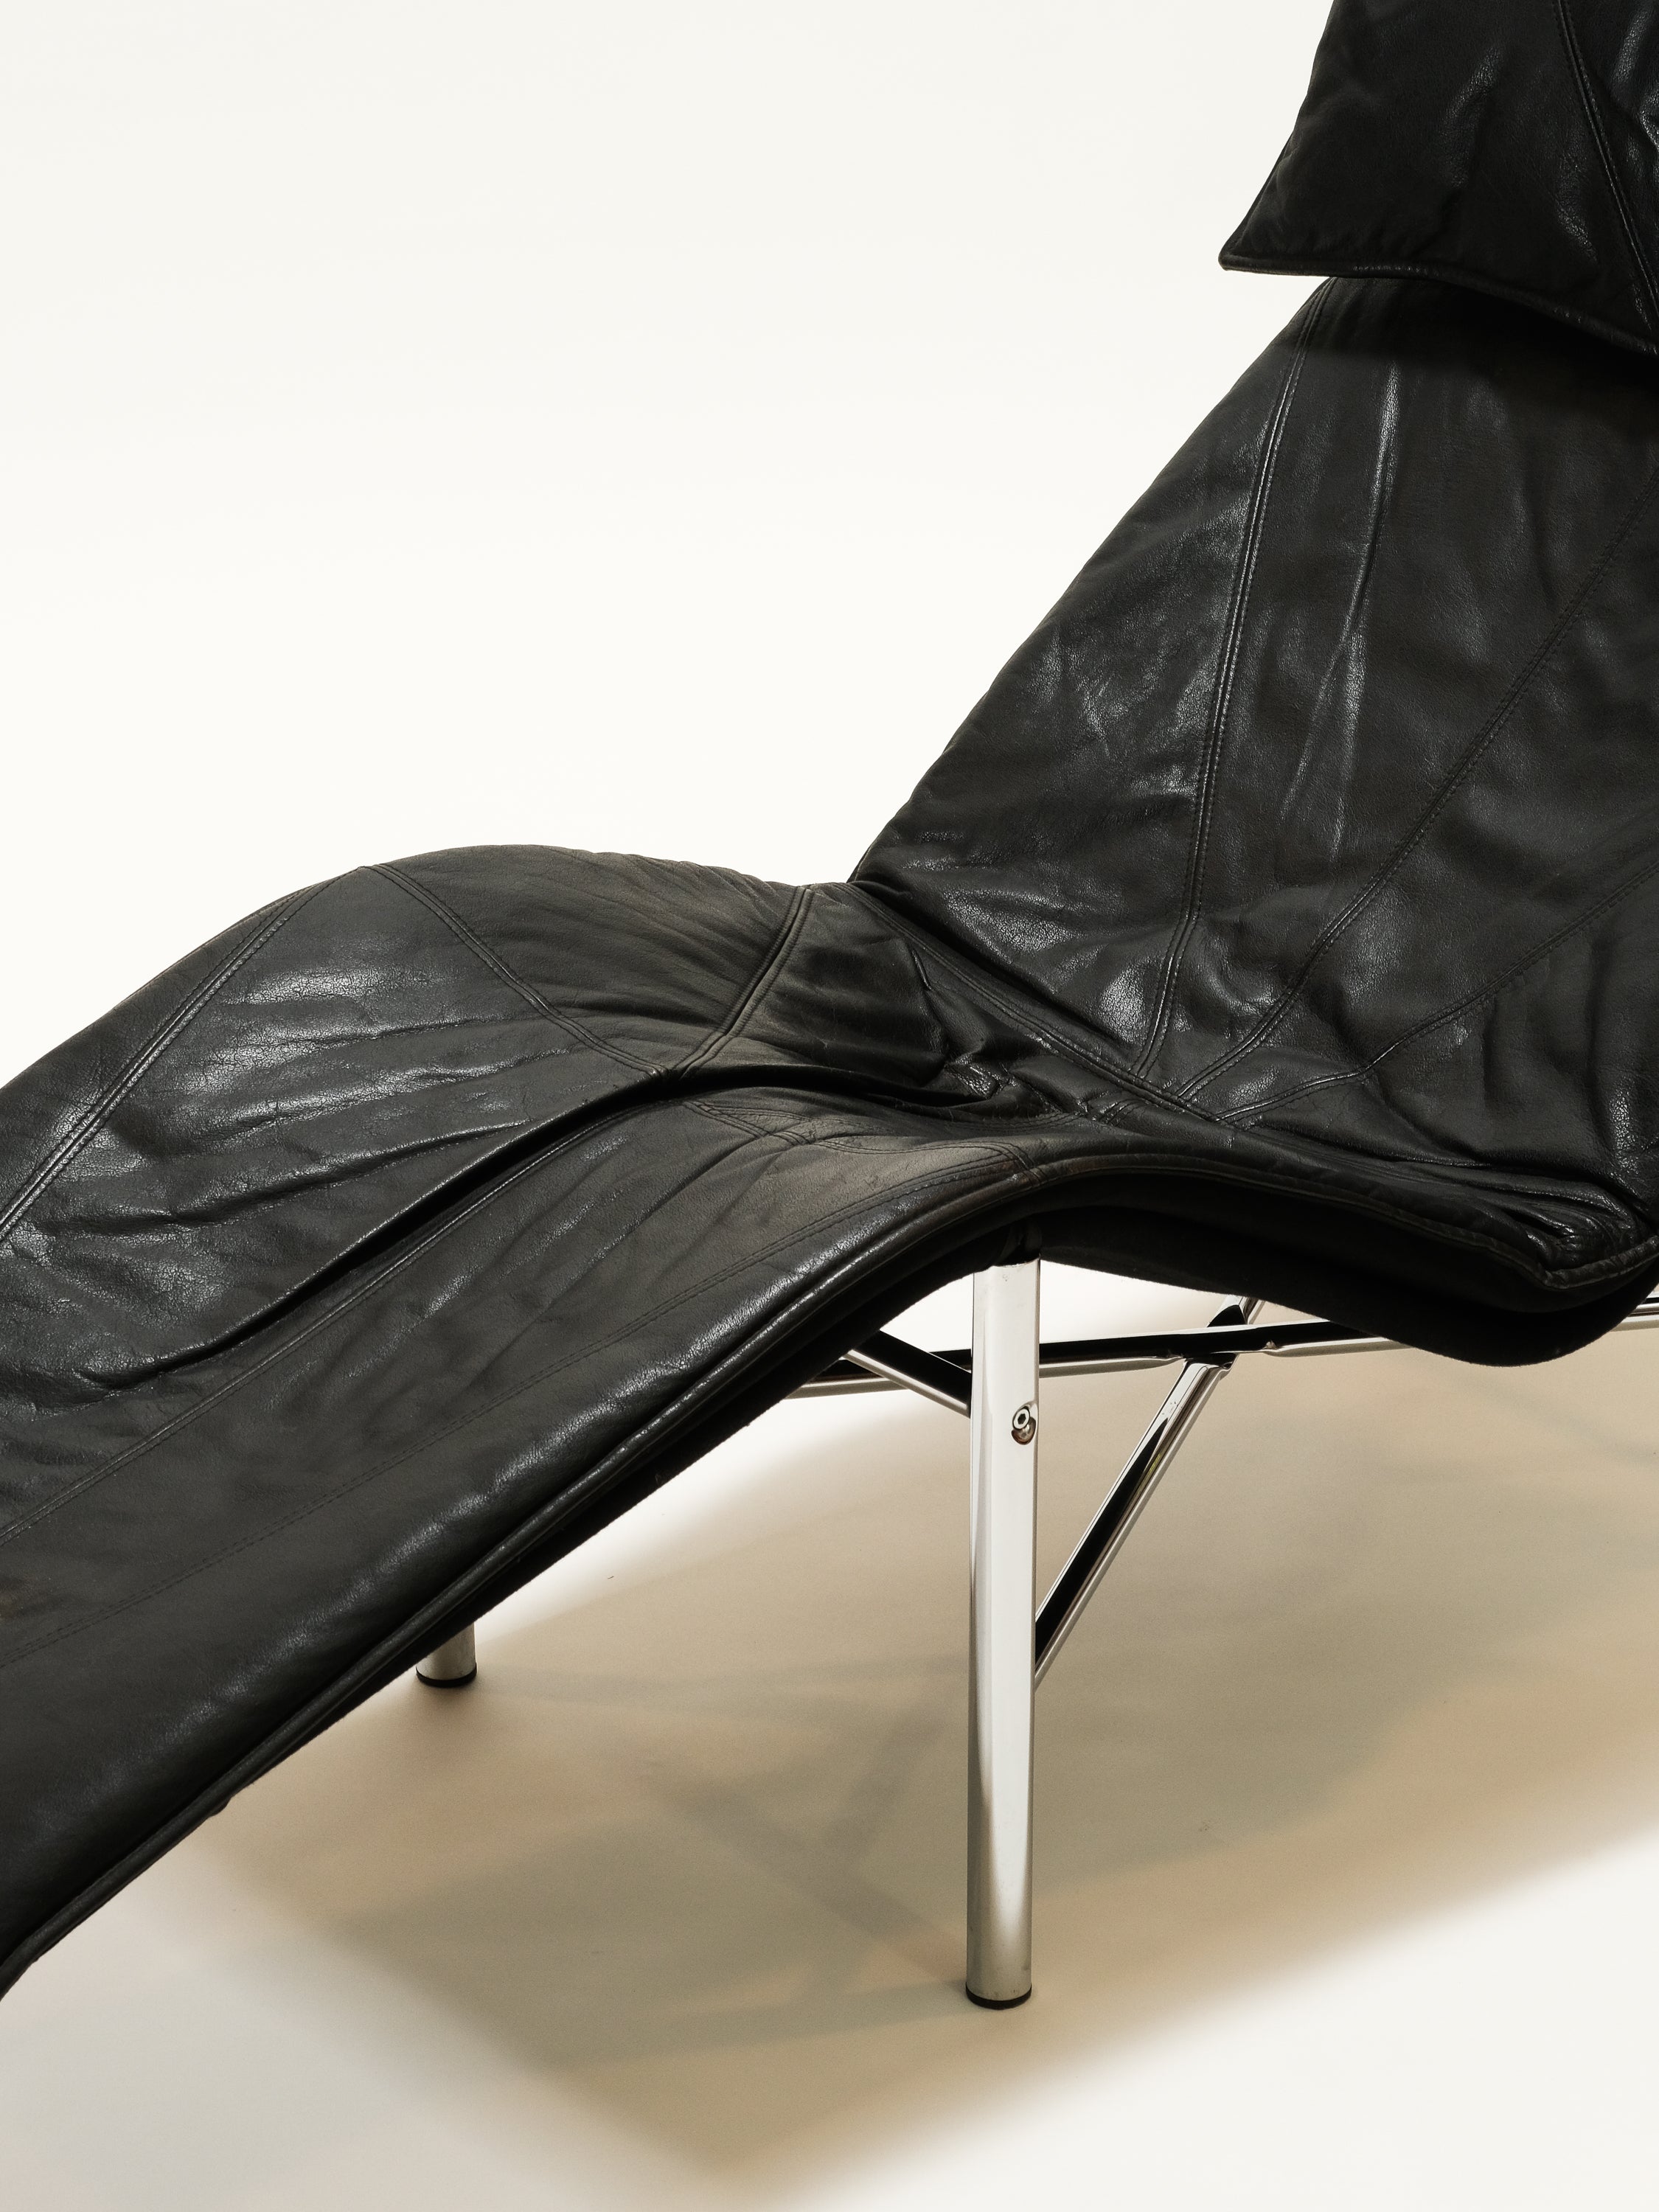 "Skye" Lounge Chair by Tord Björklund for Ikea, 1980s